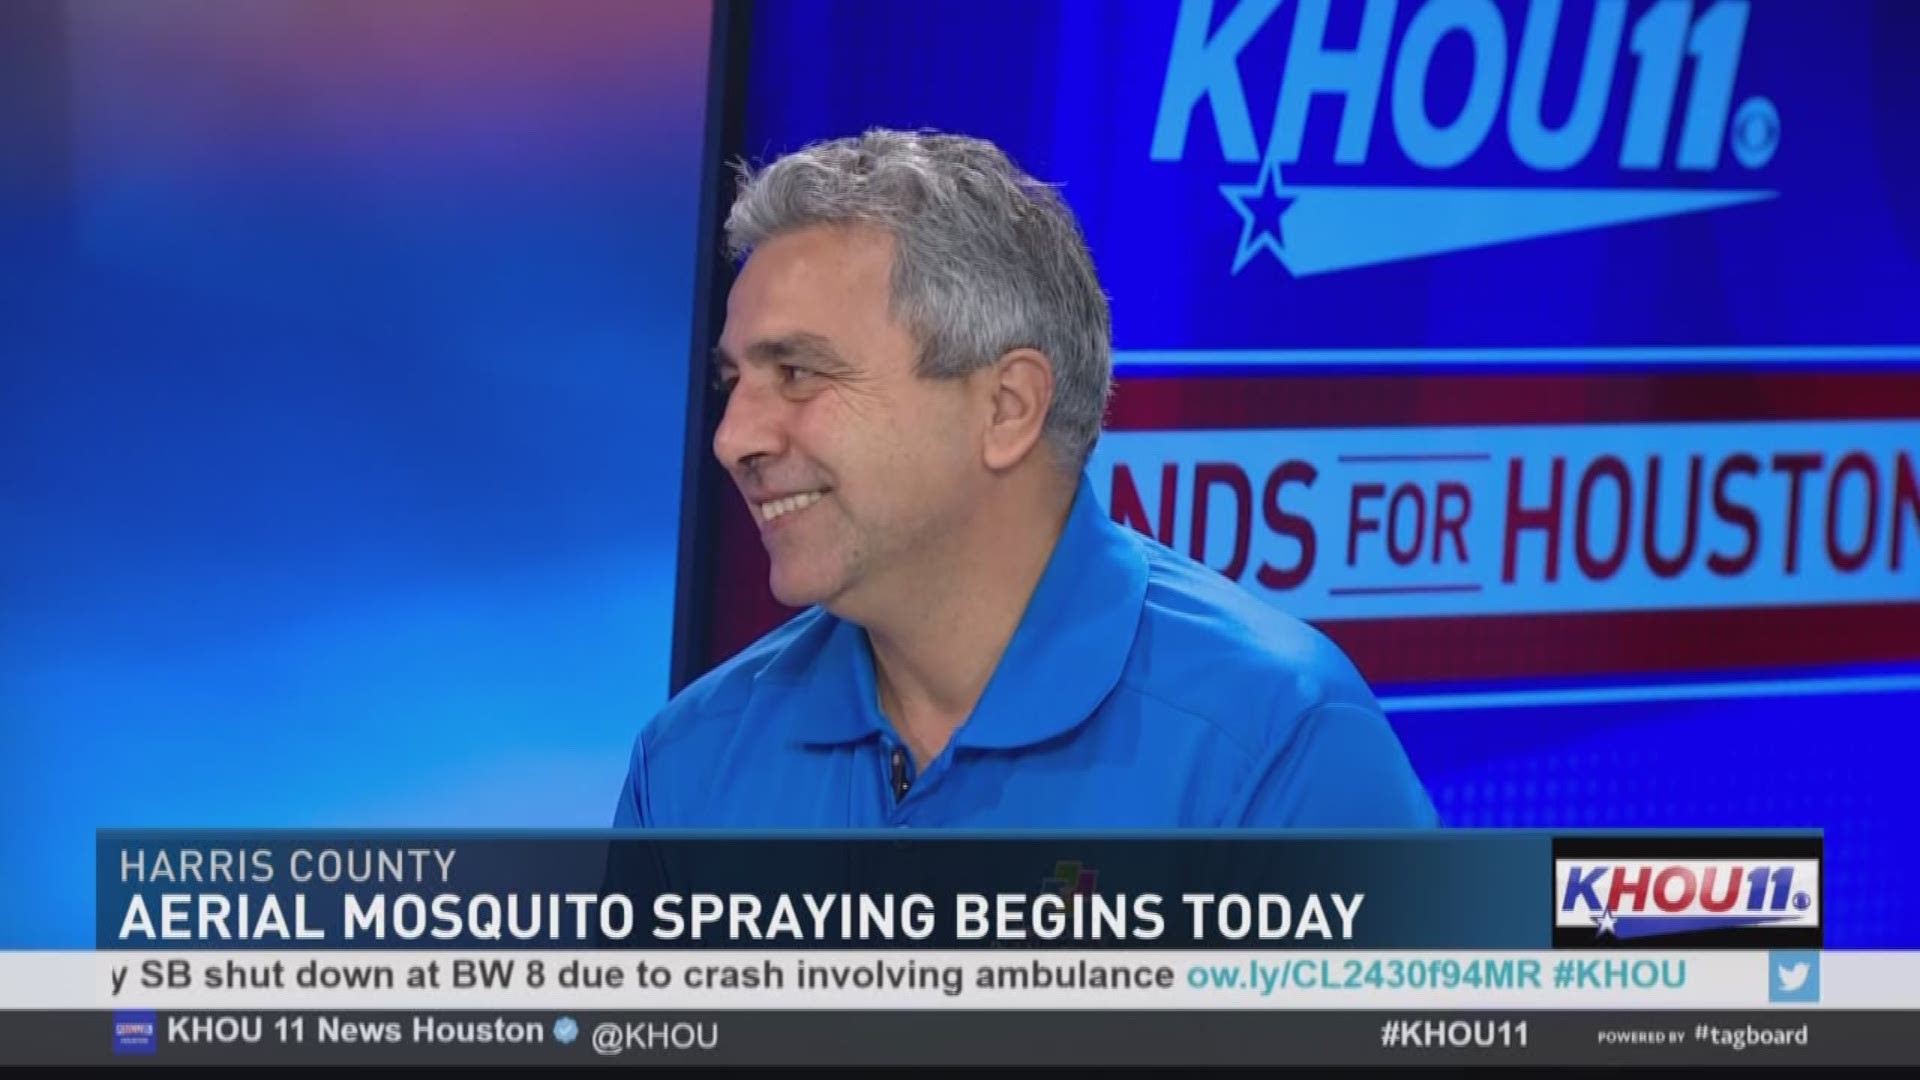 Dr. Mustapha Debboun with Harris County Public Health answers your questions about mosquito spraying